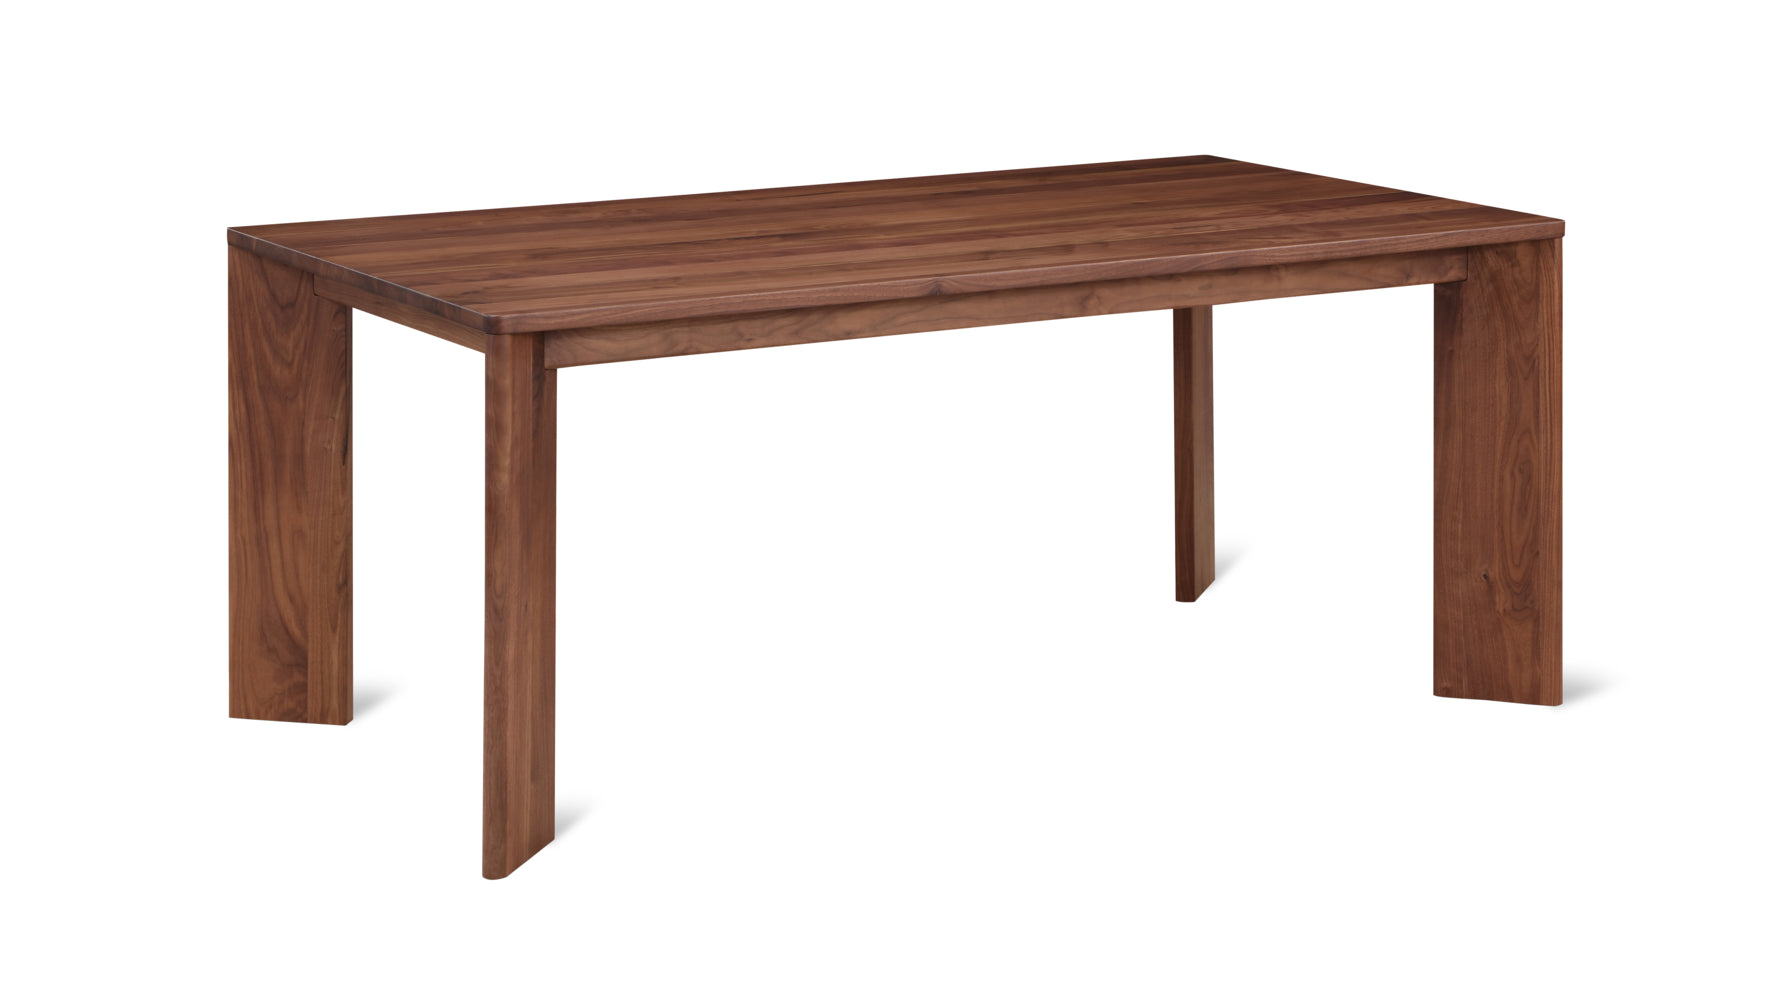 Frame Dining Table, Seats 4-6 People, American Walnut - Image 1